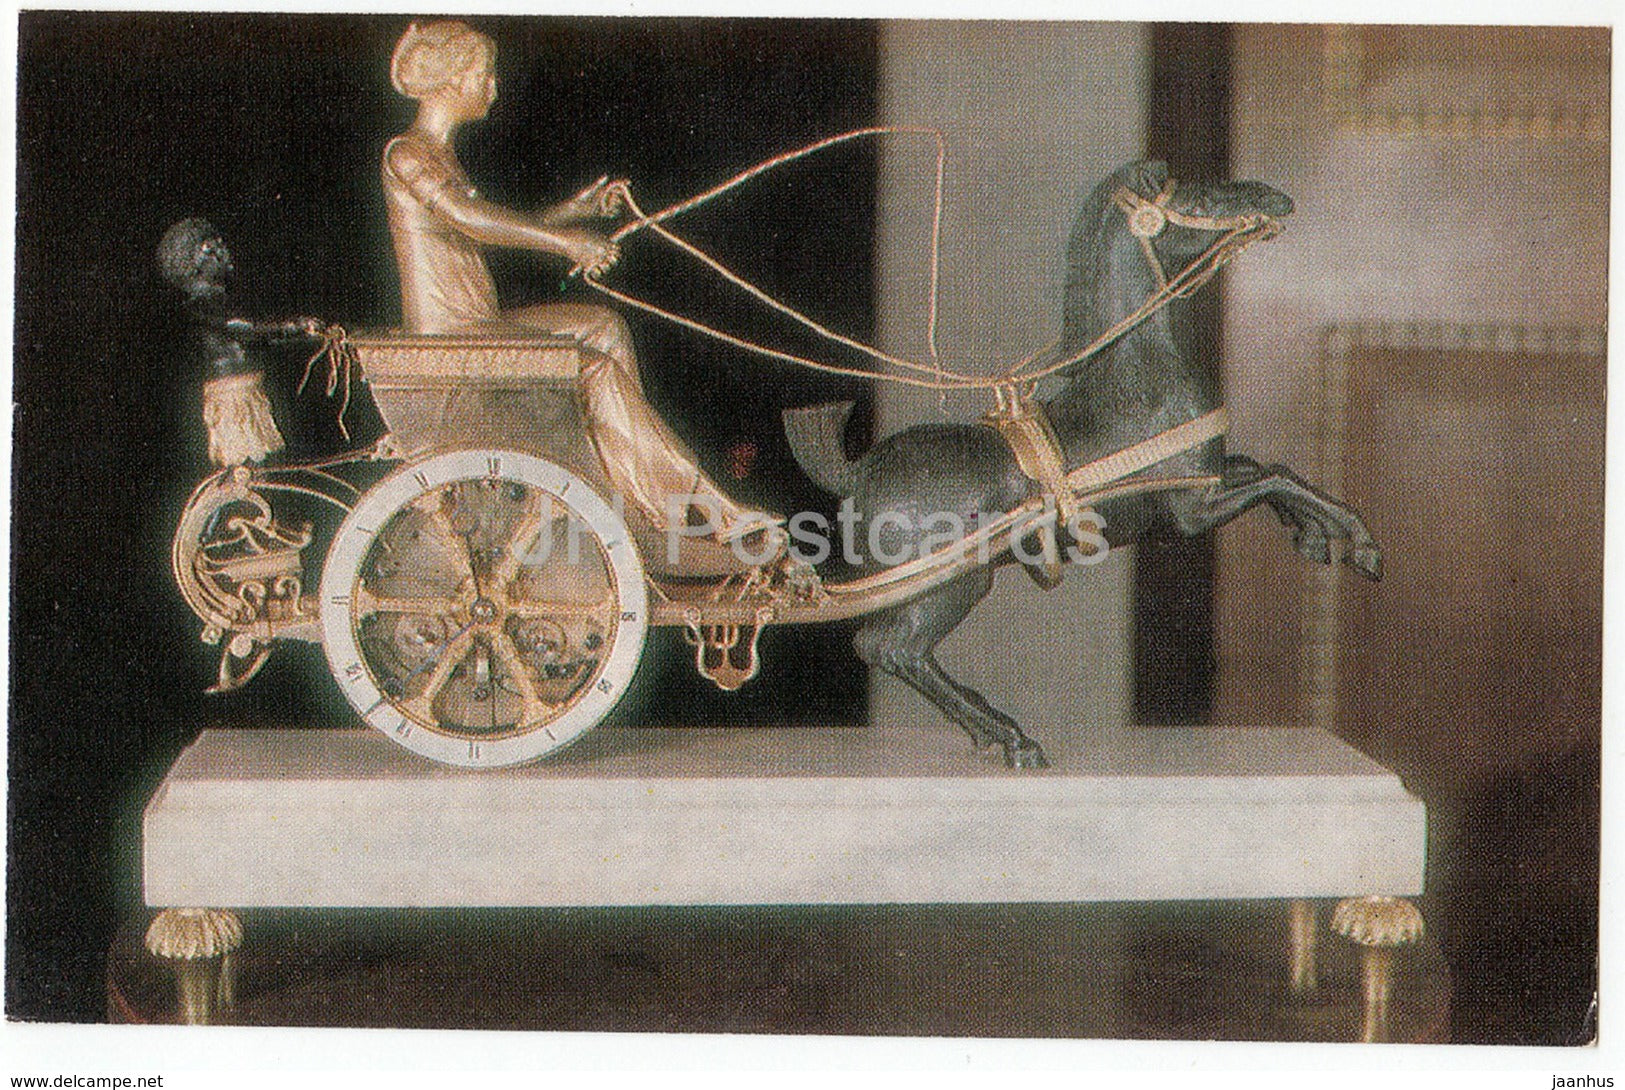 Arkhangelskoye Palace - Clock in the Musical salon - horse carriage - Turist - 1976 - Russia USSR - unused - JH Postcards